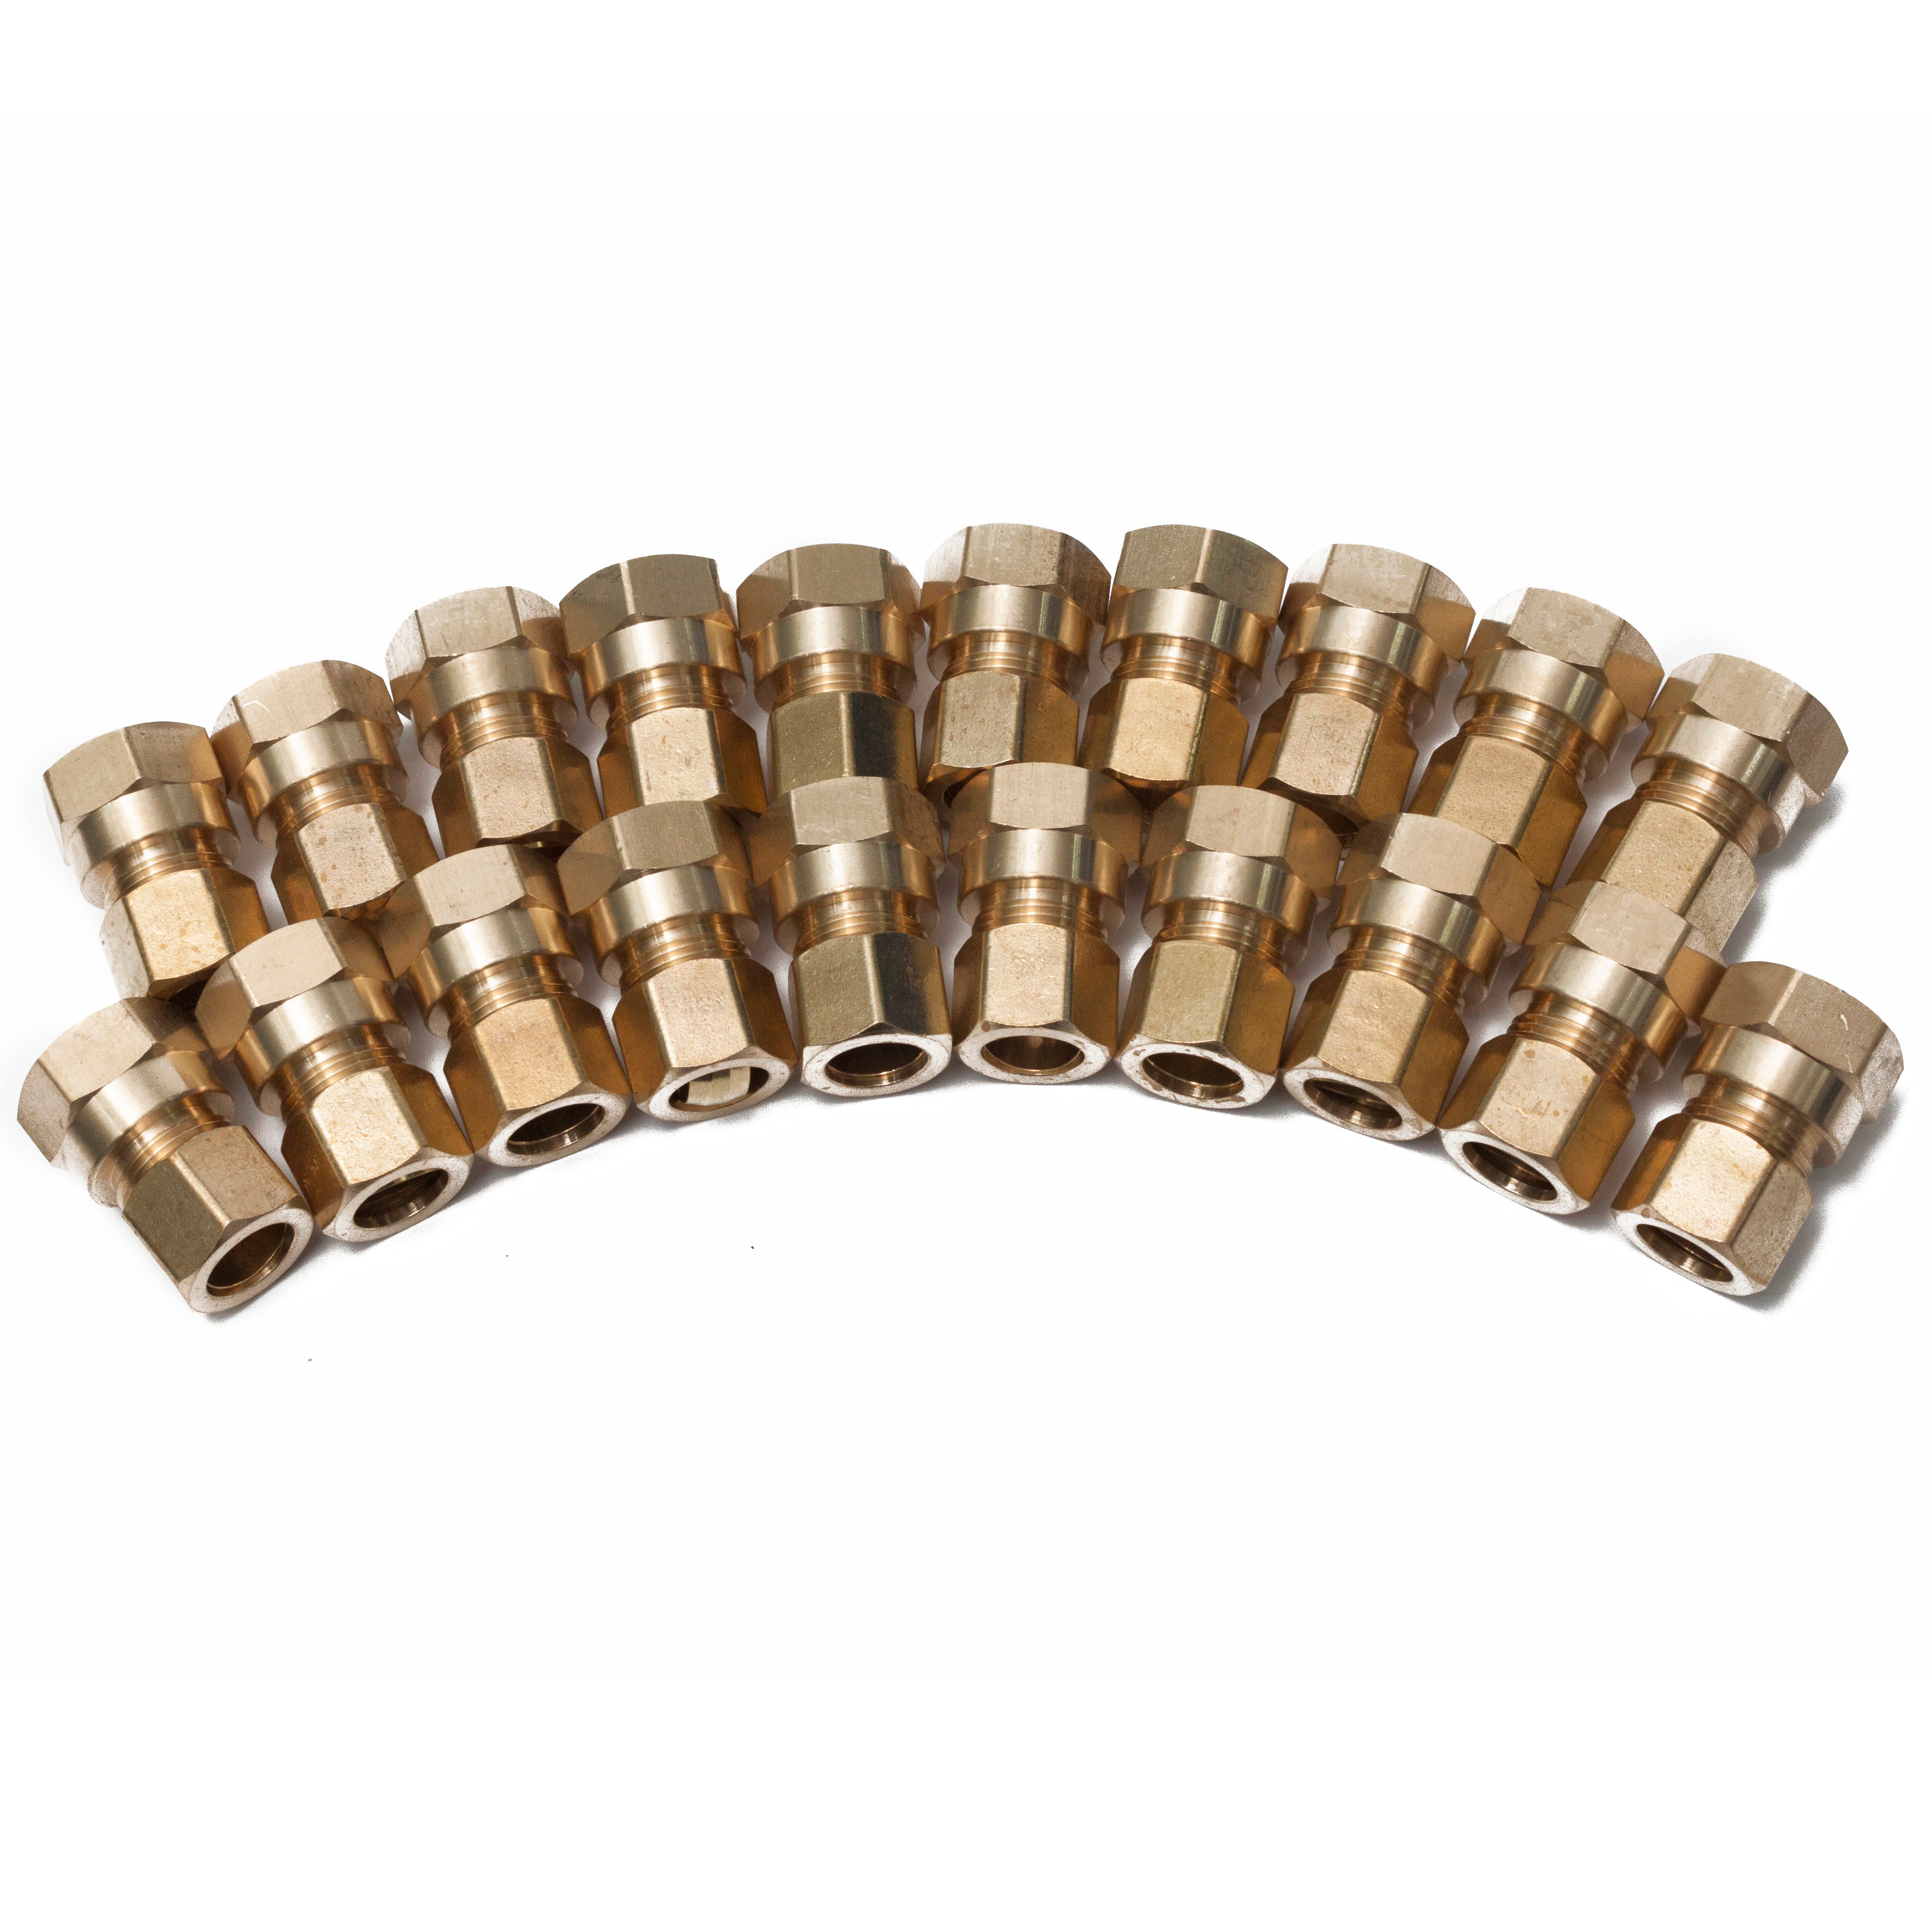 LTWFITTING Brass 1/2 OD x 1/2 Female NPT Compression Connector Fitting(Pack of 20)